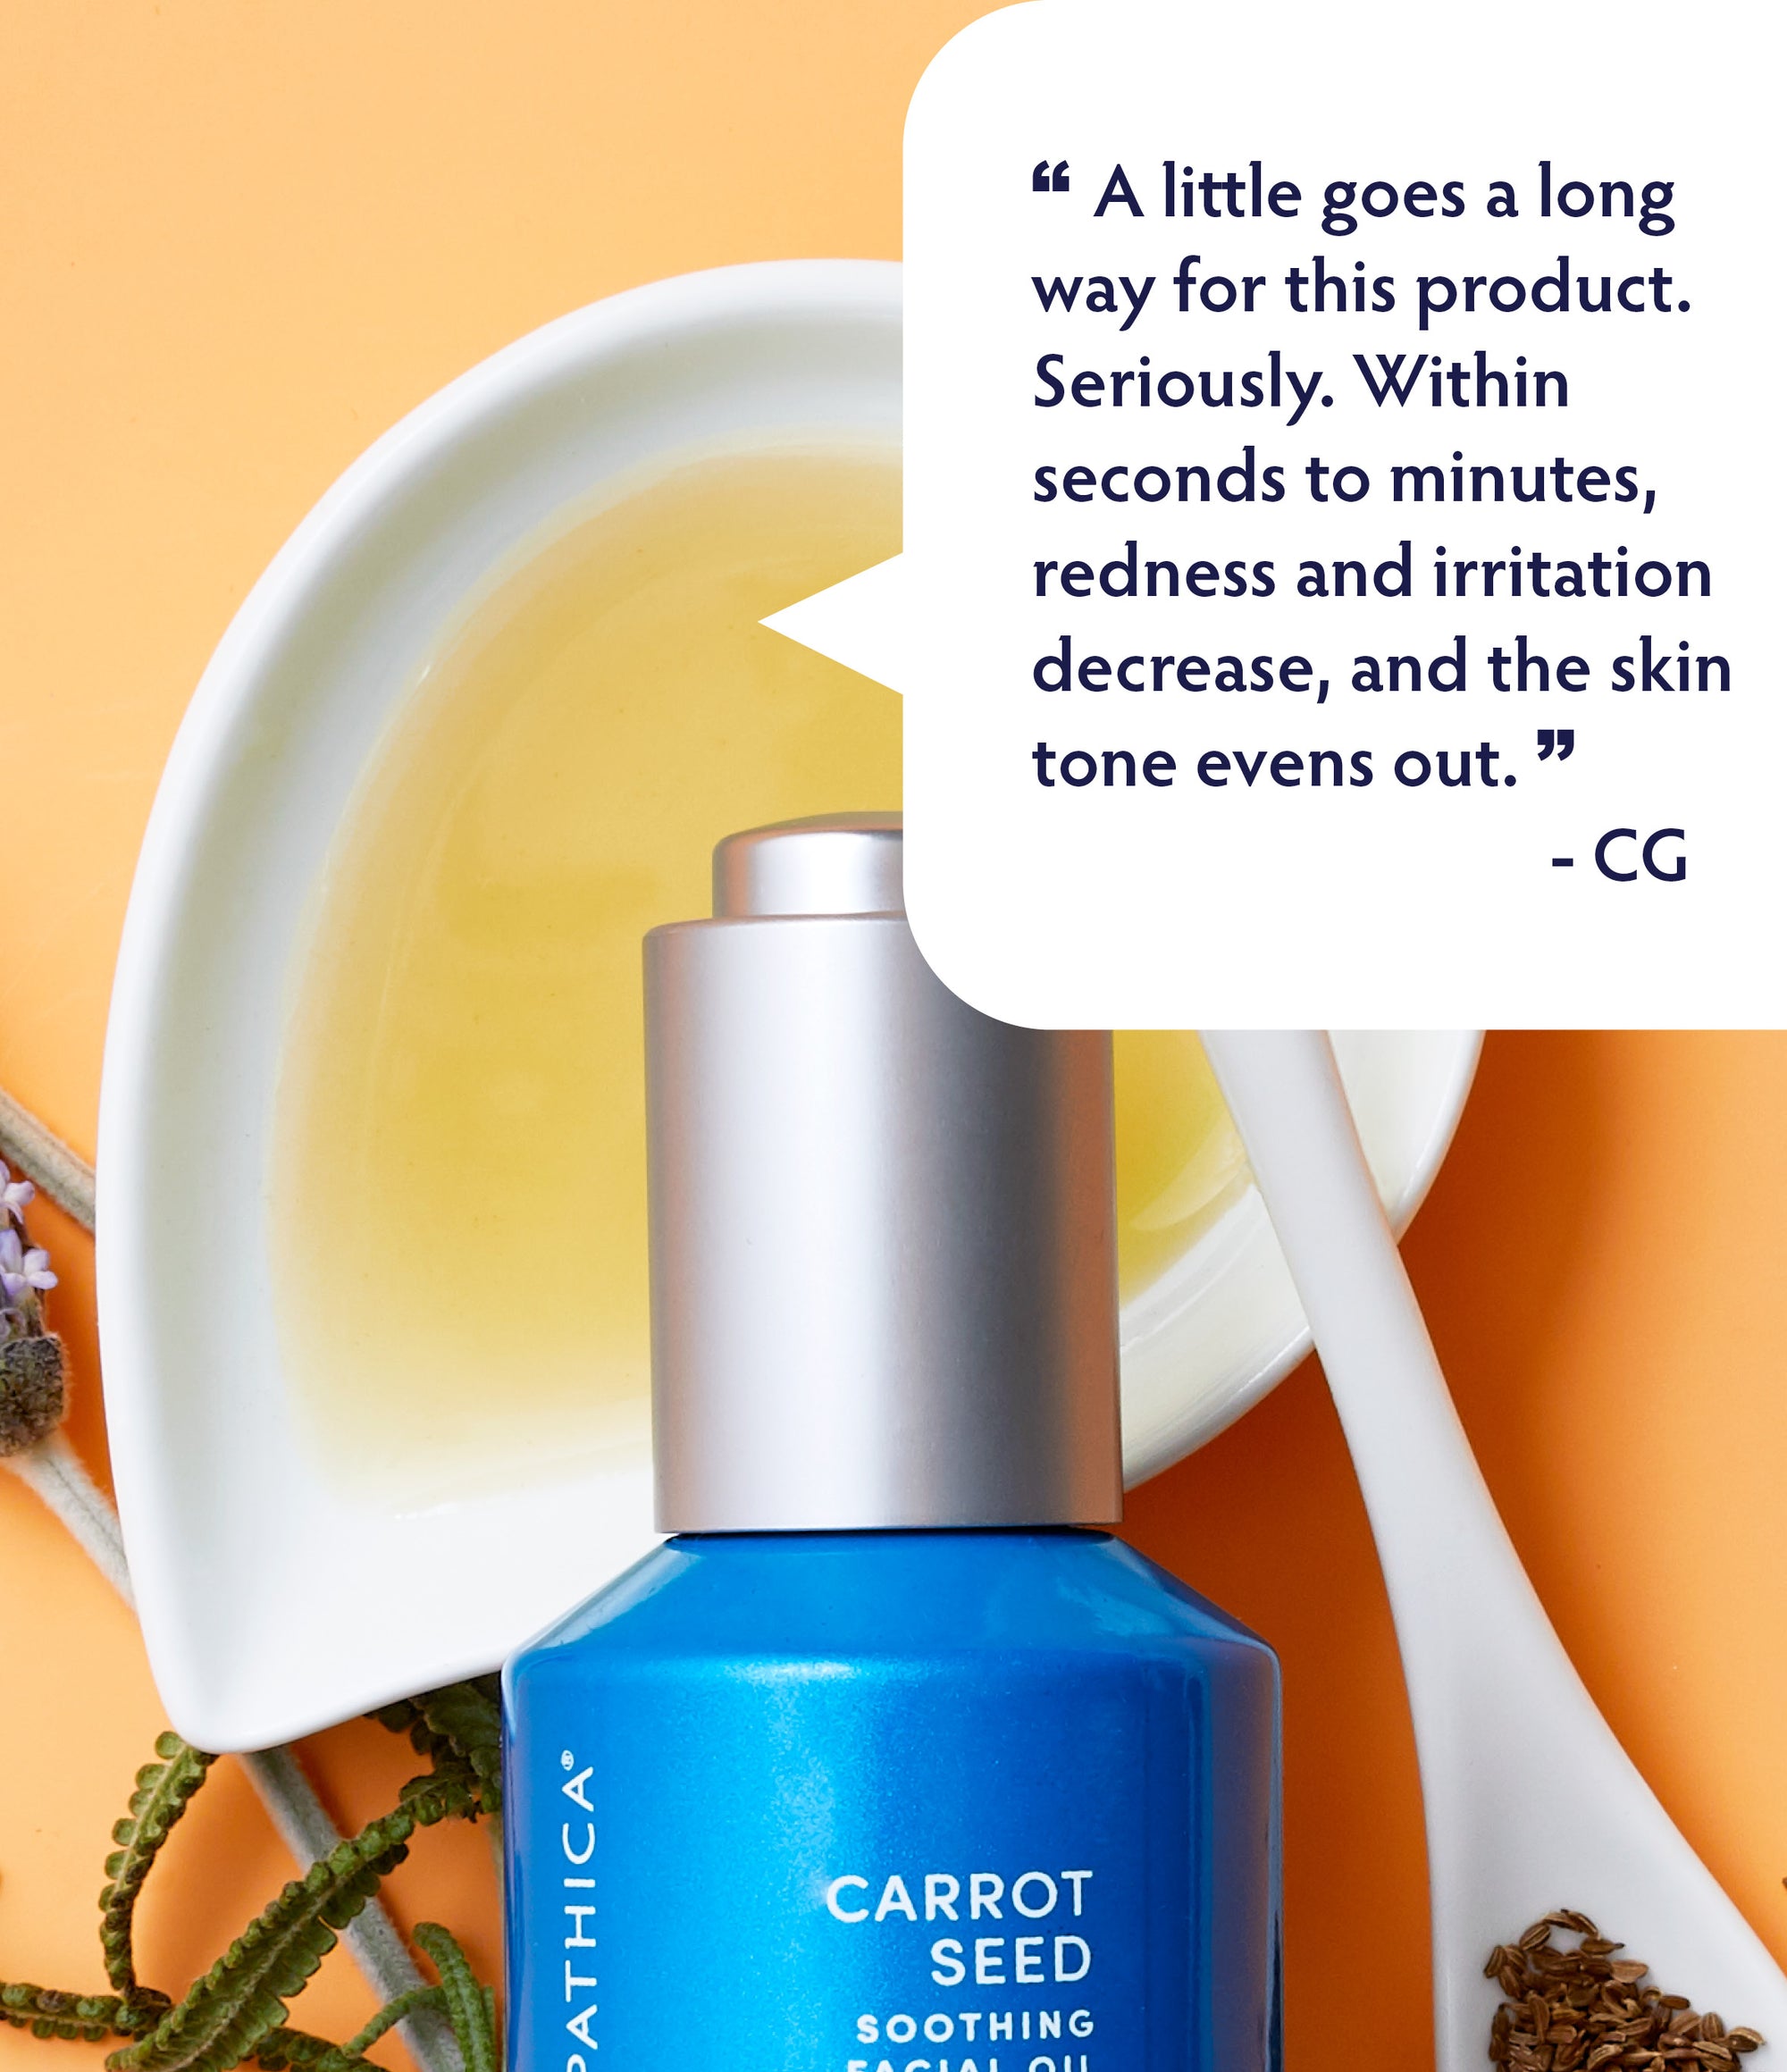 Carrot Seed Soothing Facial Oil customer endorsement